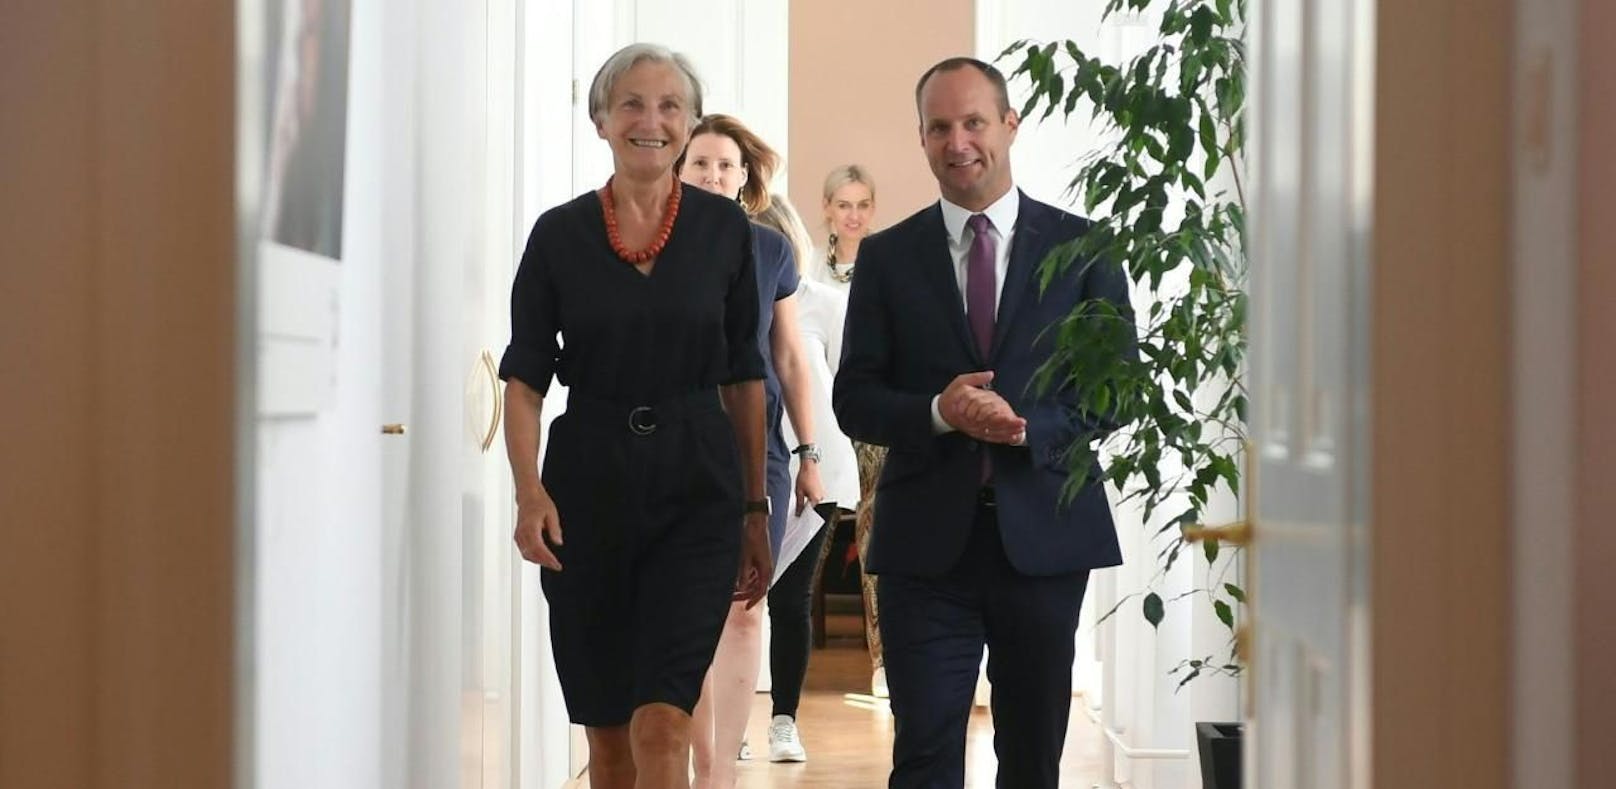 NEOS-Chef Strolz mit Irmgard Griss